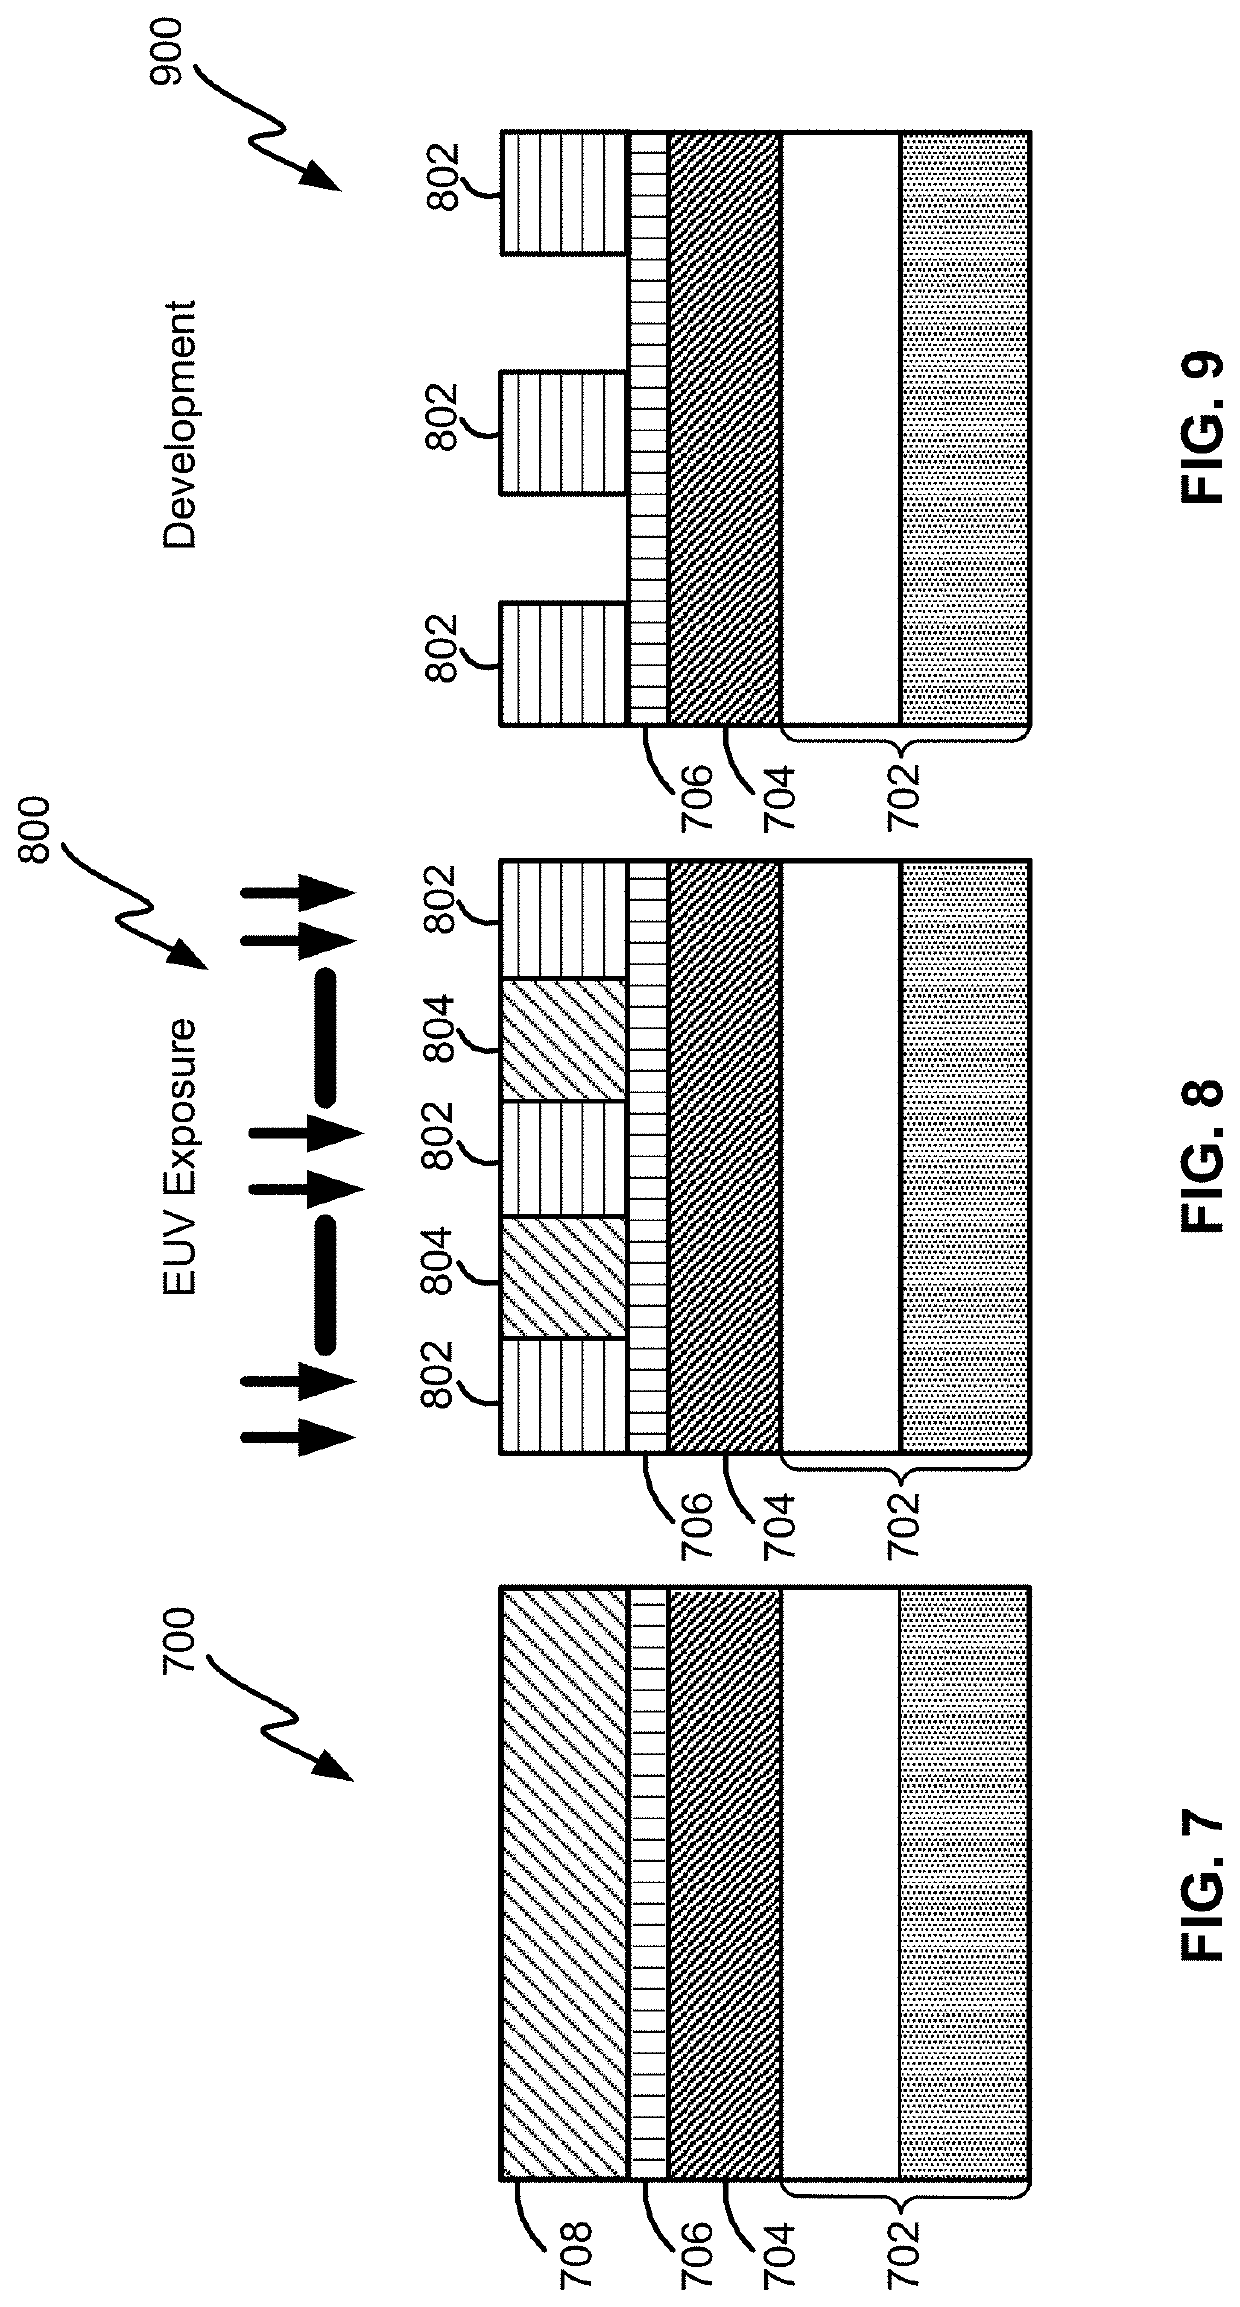 Structure including a photoresist underlayer and method of forming same